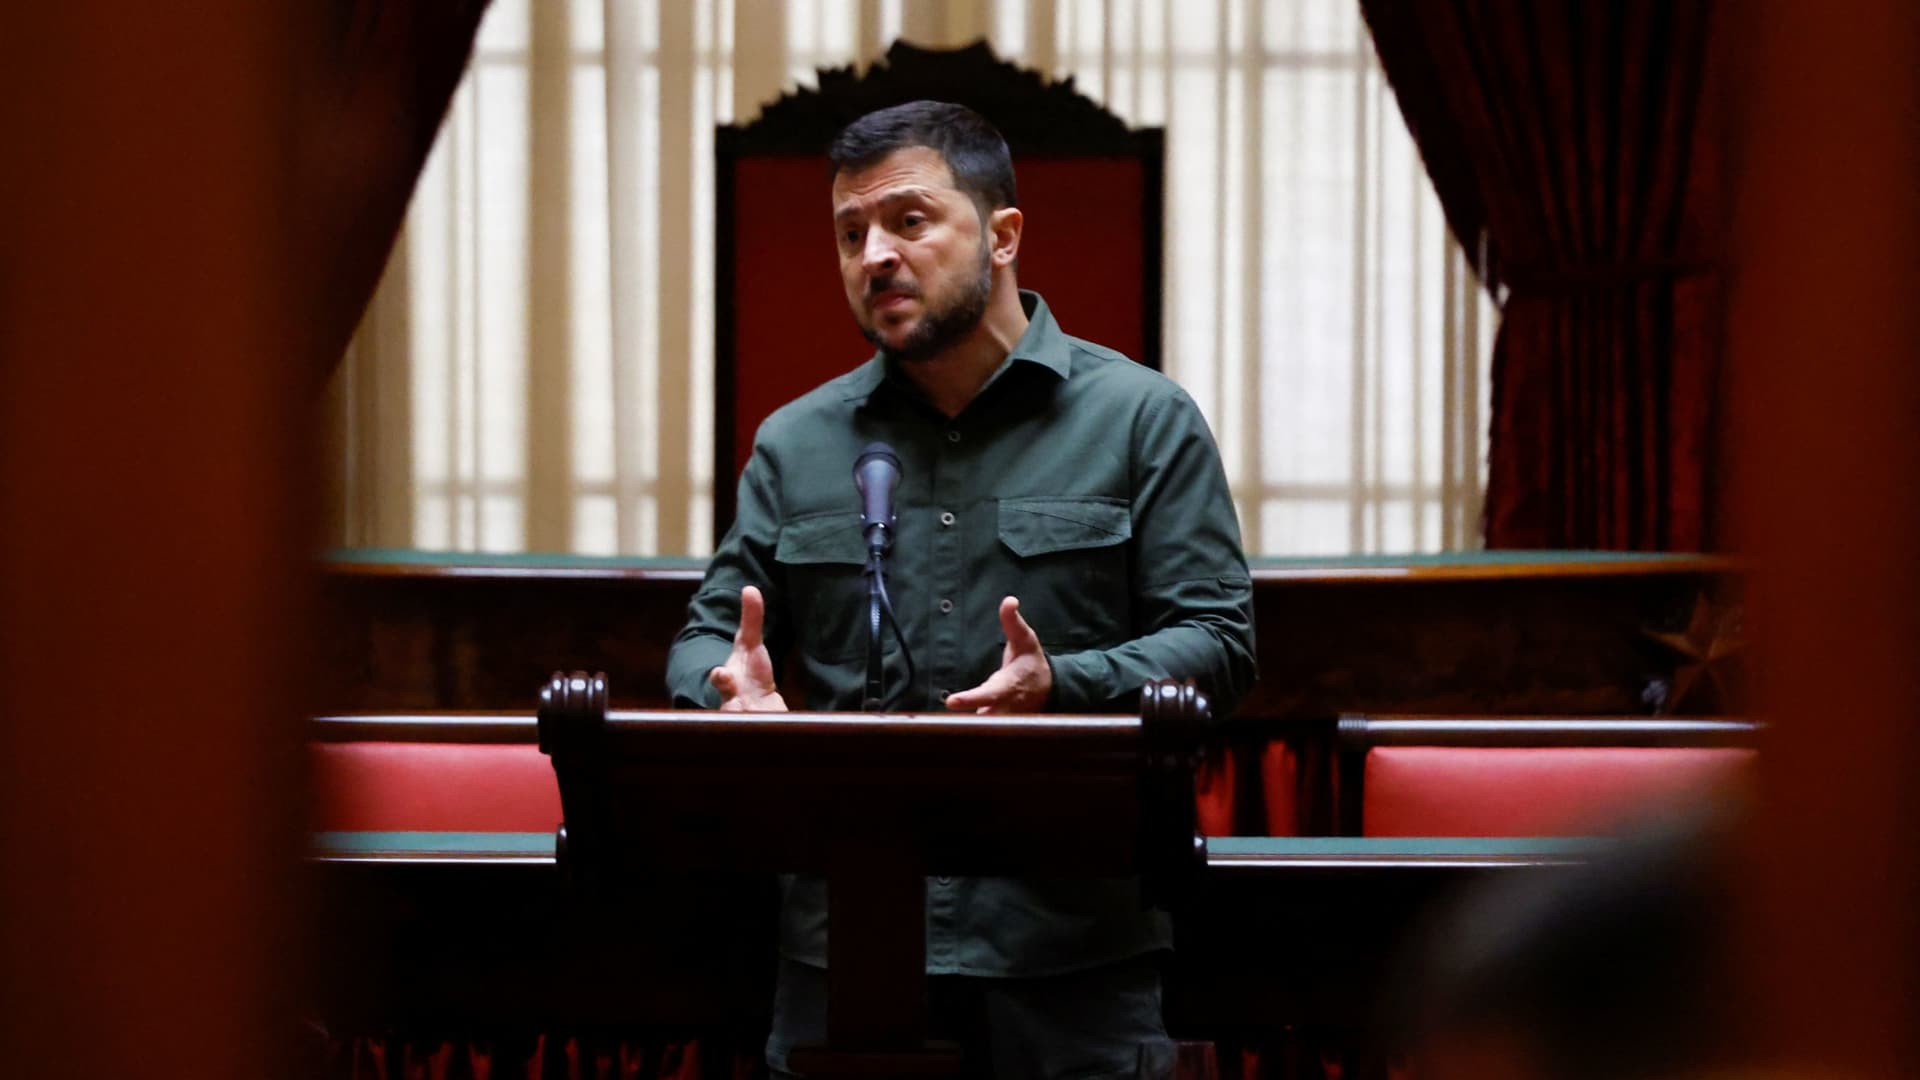 Ukrainian President Volodymyr Zelenskyy is seen speaking during a meeting with all members of the U.S. Senate held in the Old Senate Chamber during a visit to the U.S. Capitol in Washington, September 21, 2023. 